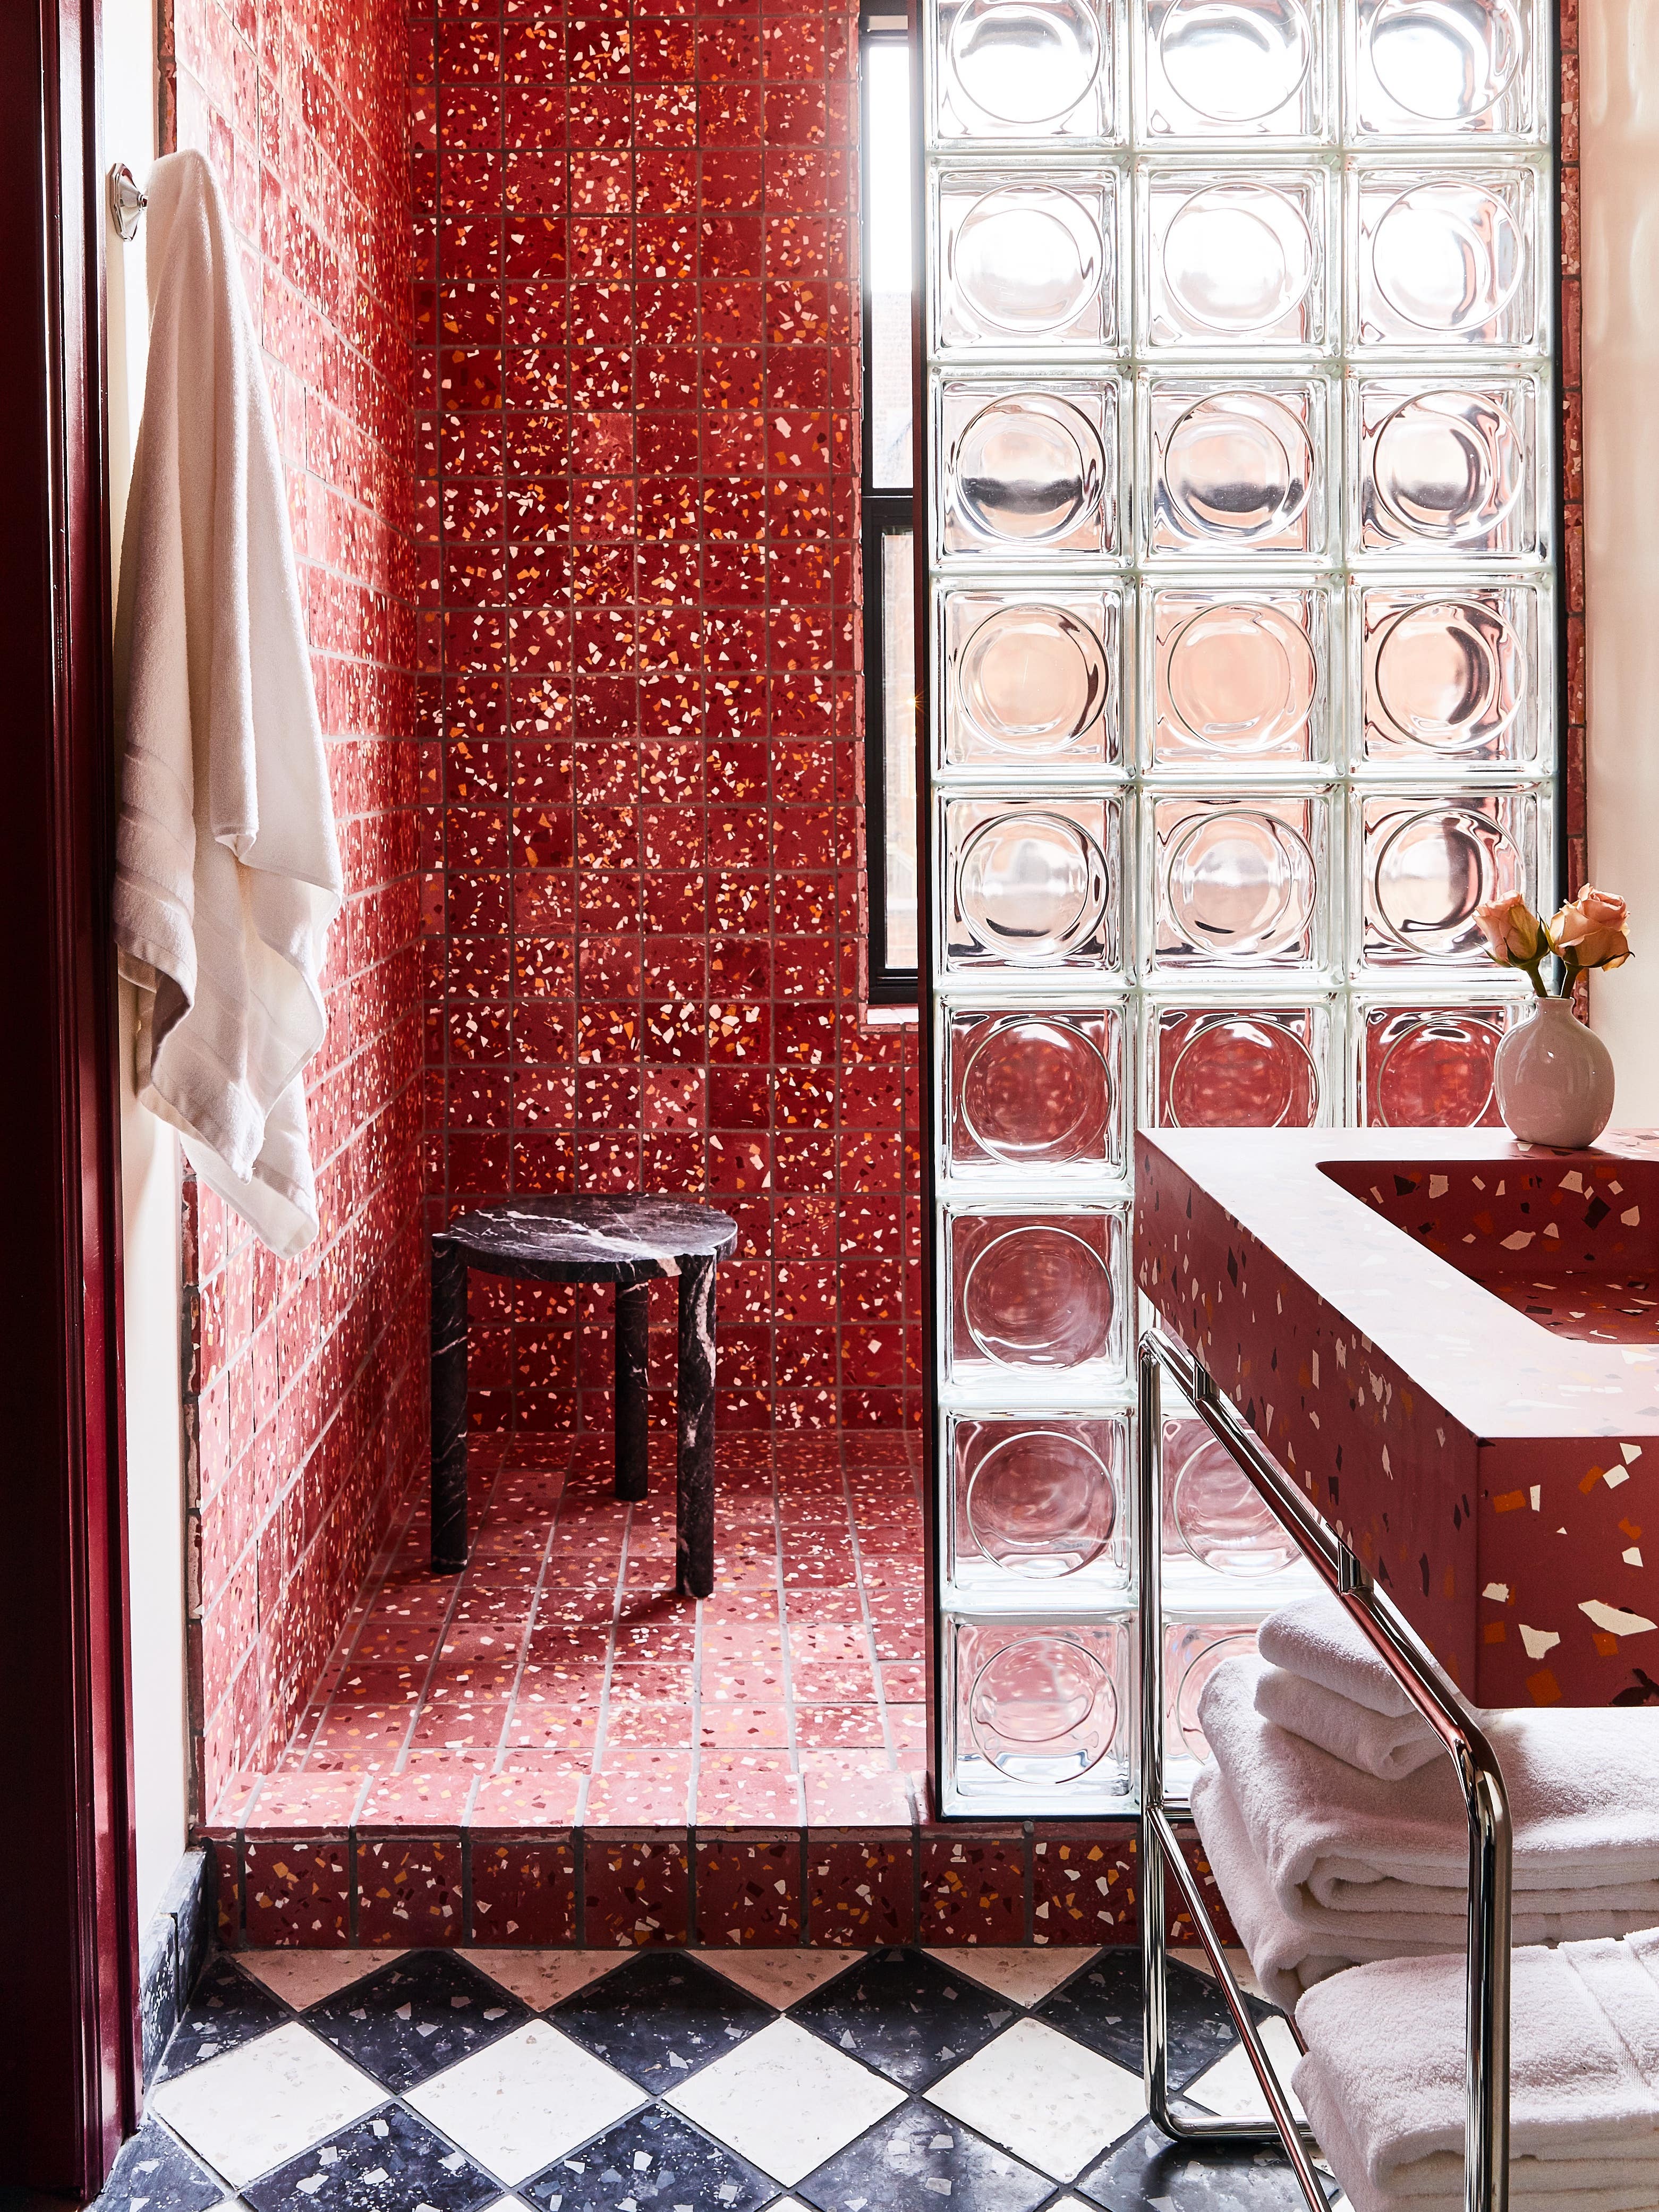 This Petite Space Convinced Me I Need a Blush Bathroom